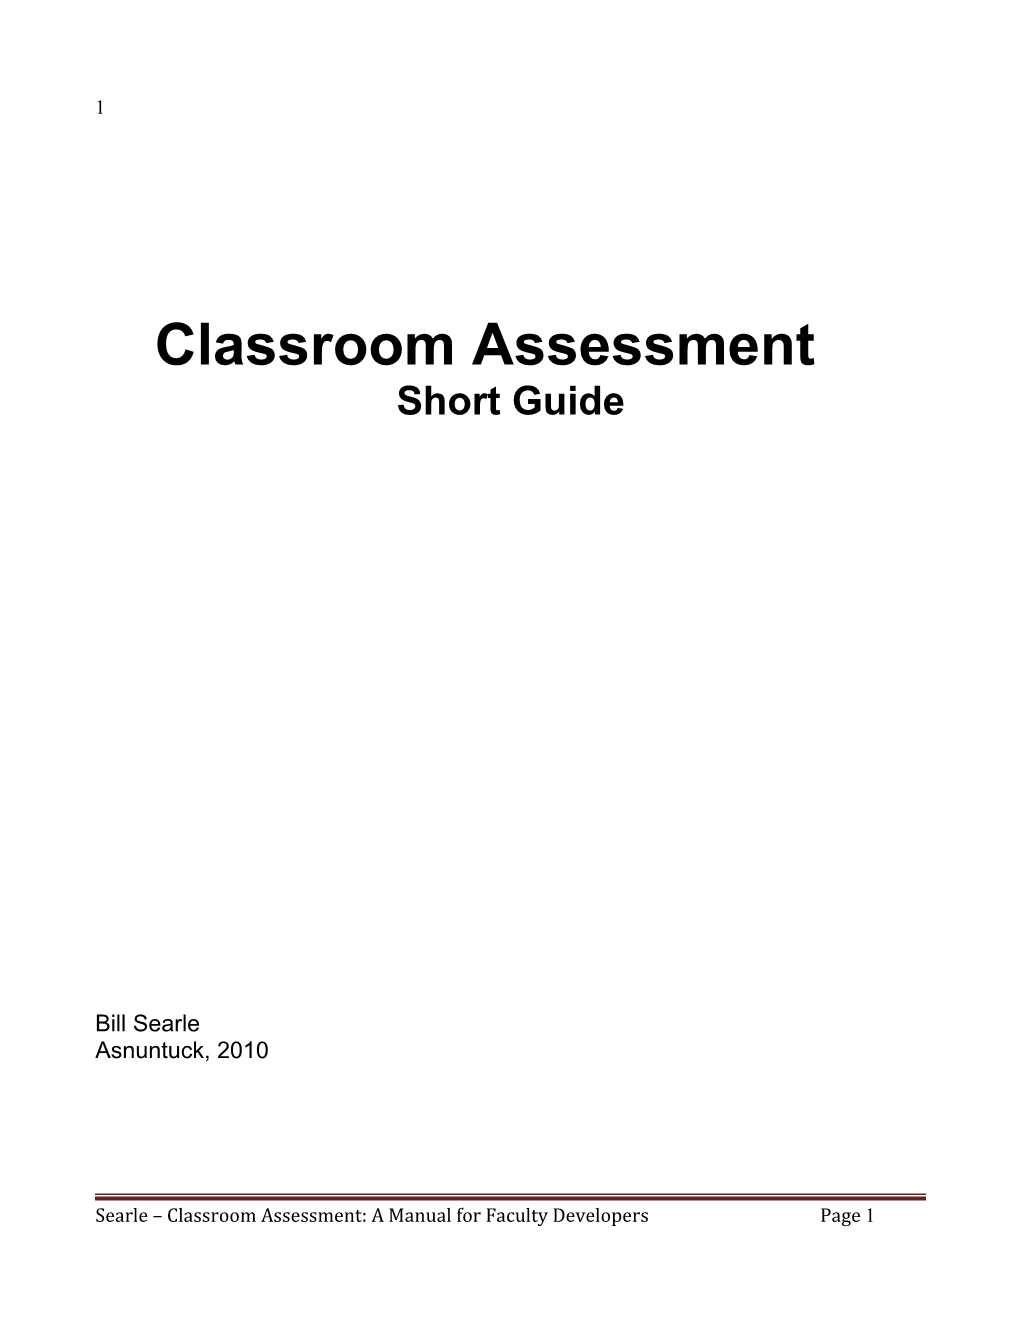 A Short Introduction to Classroom Assessment